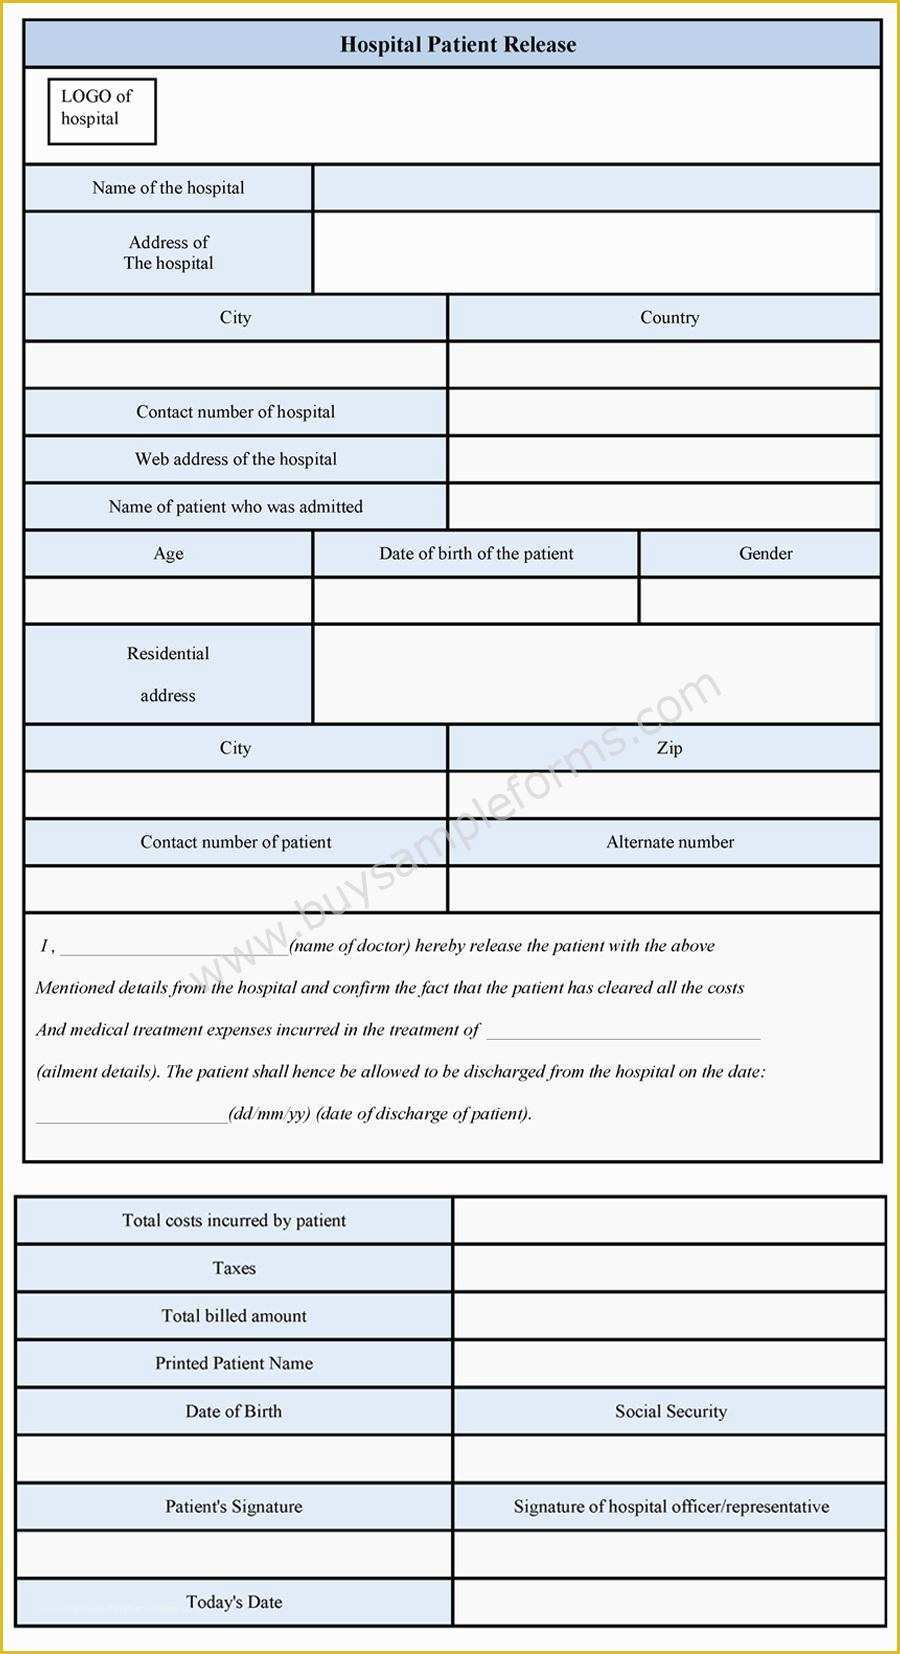 Free Medical Discharge forms Templates Of Hospital Patient Release form Sample forms